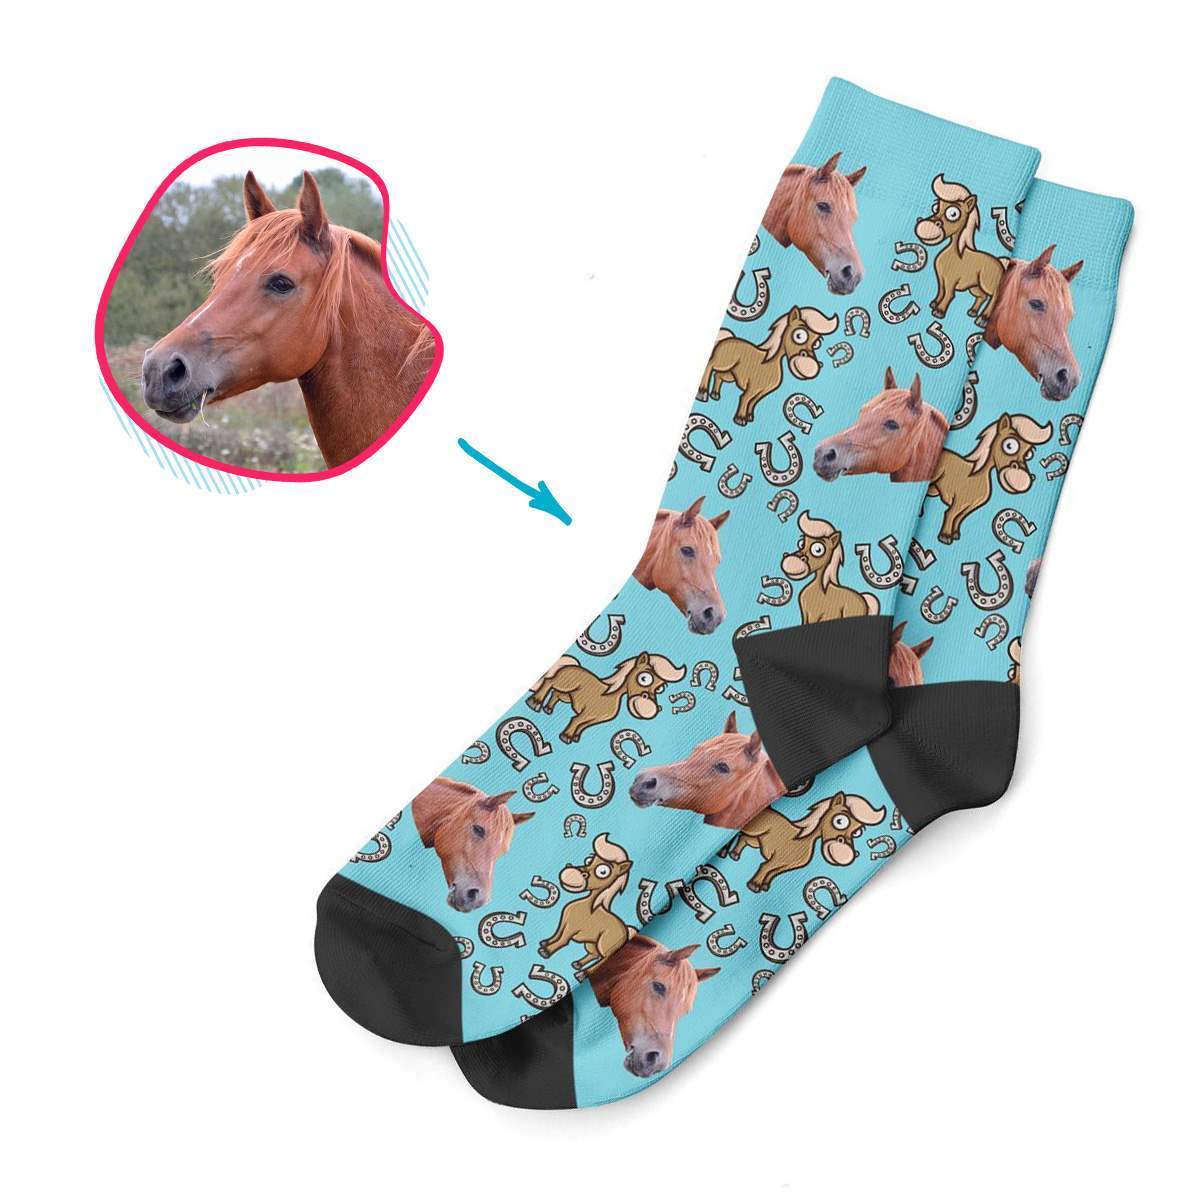 blue Horse socks personalized with photo of face printed on them